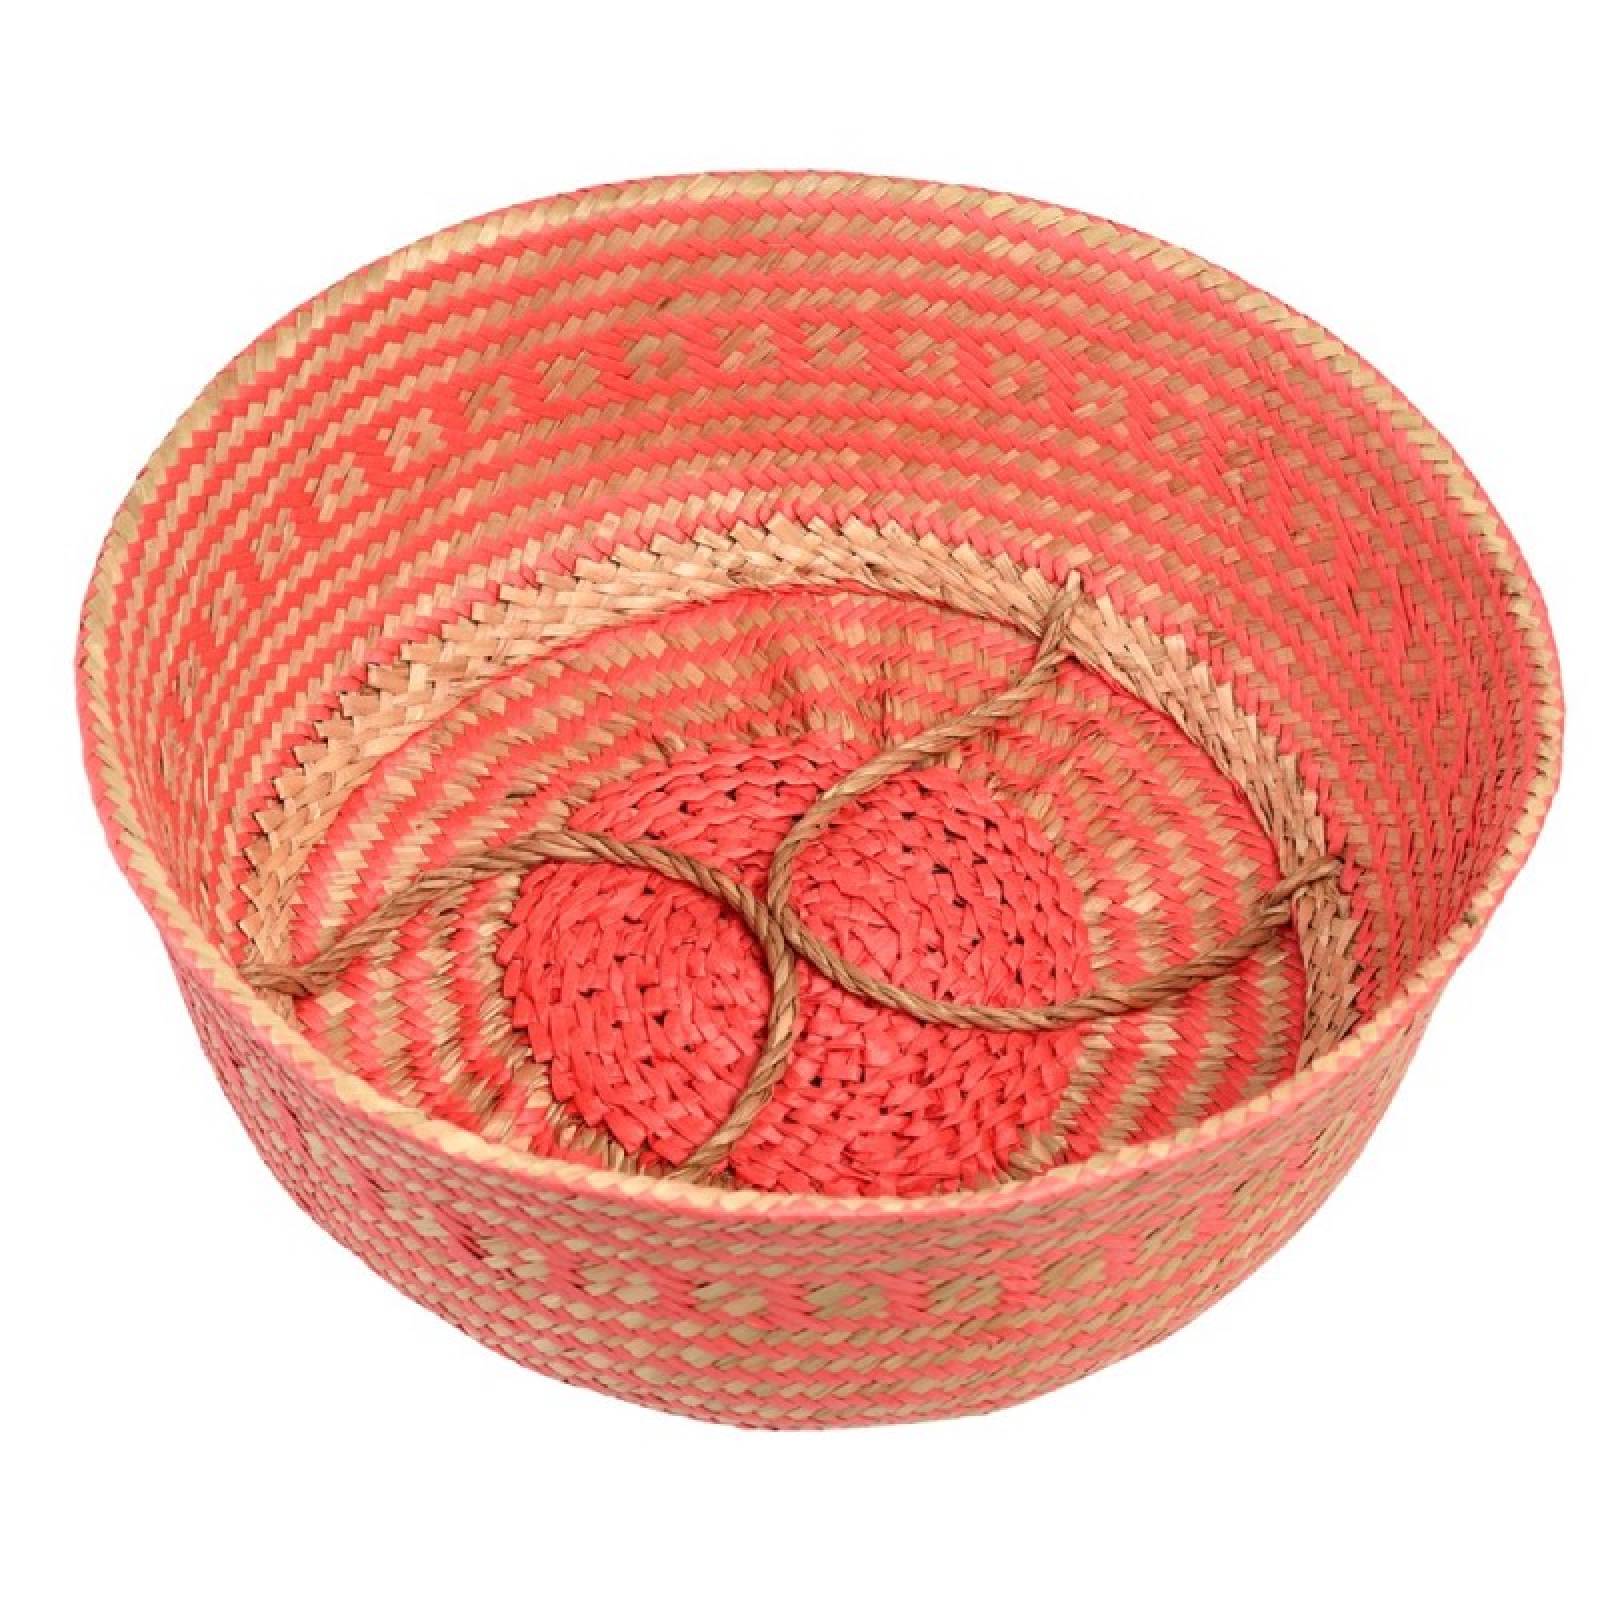 Large Round Seagrass Basket With Handles In Coral thumbnails